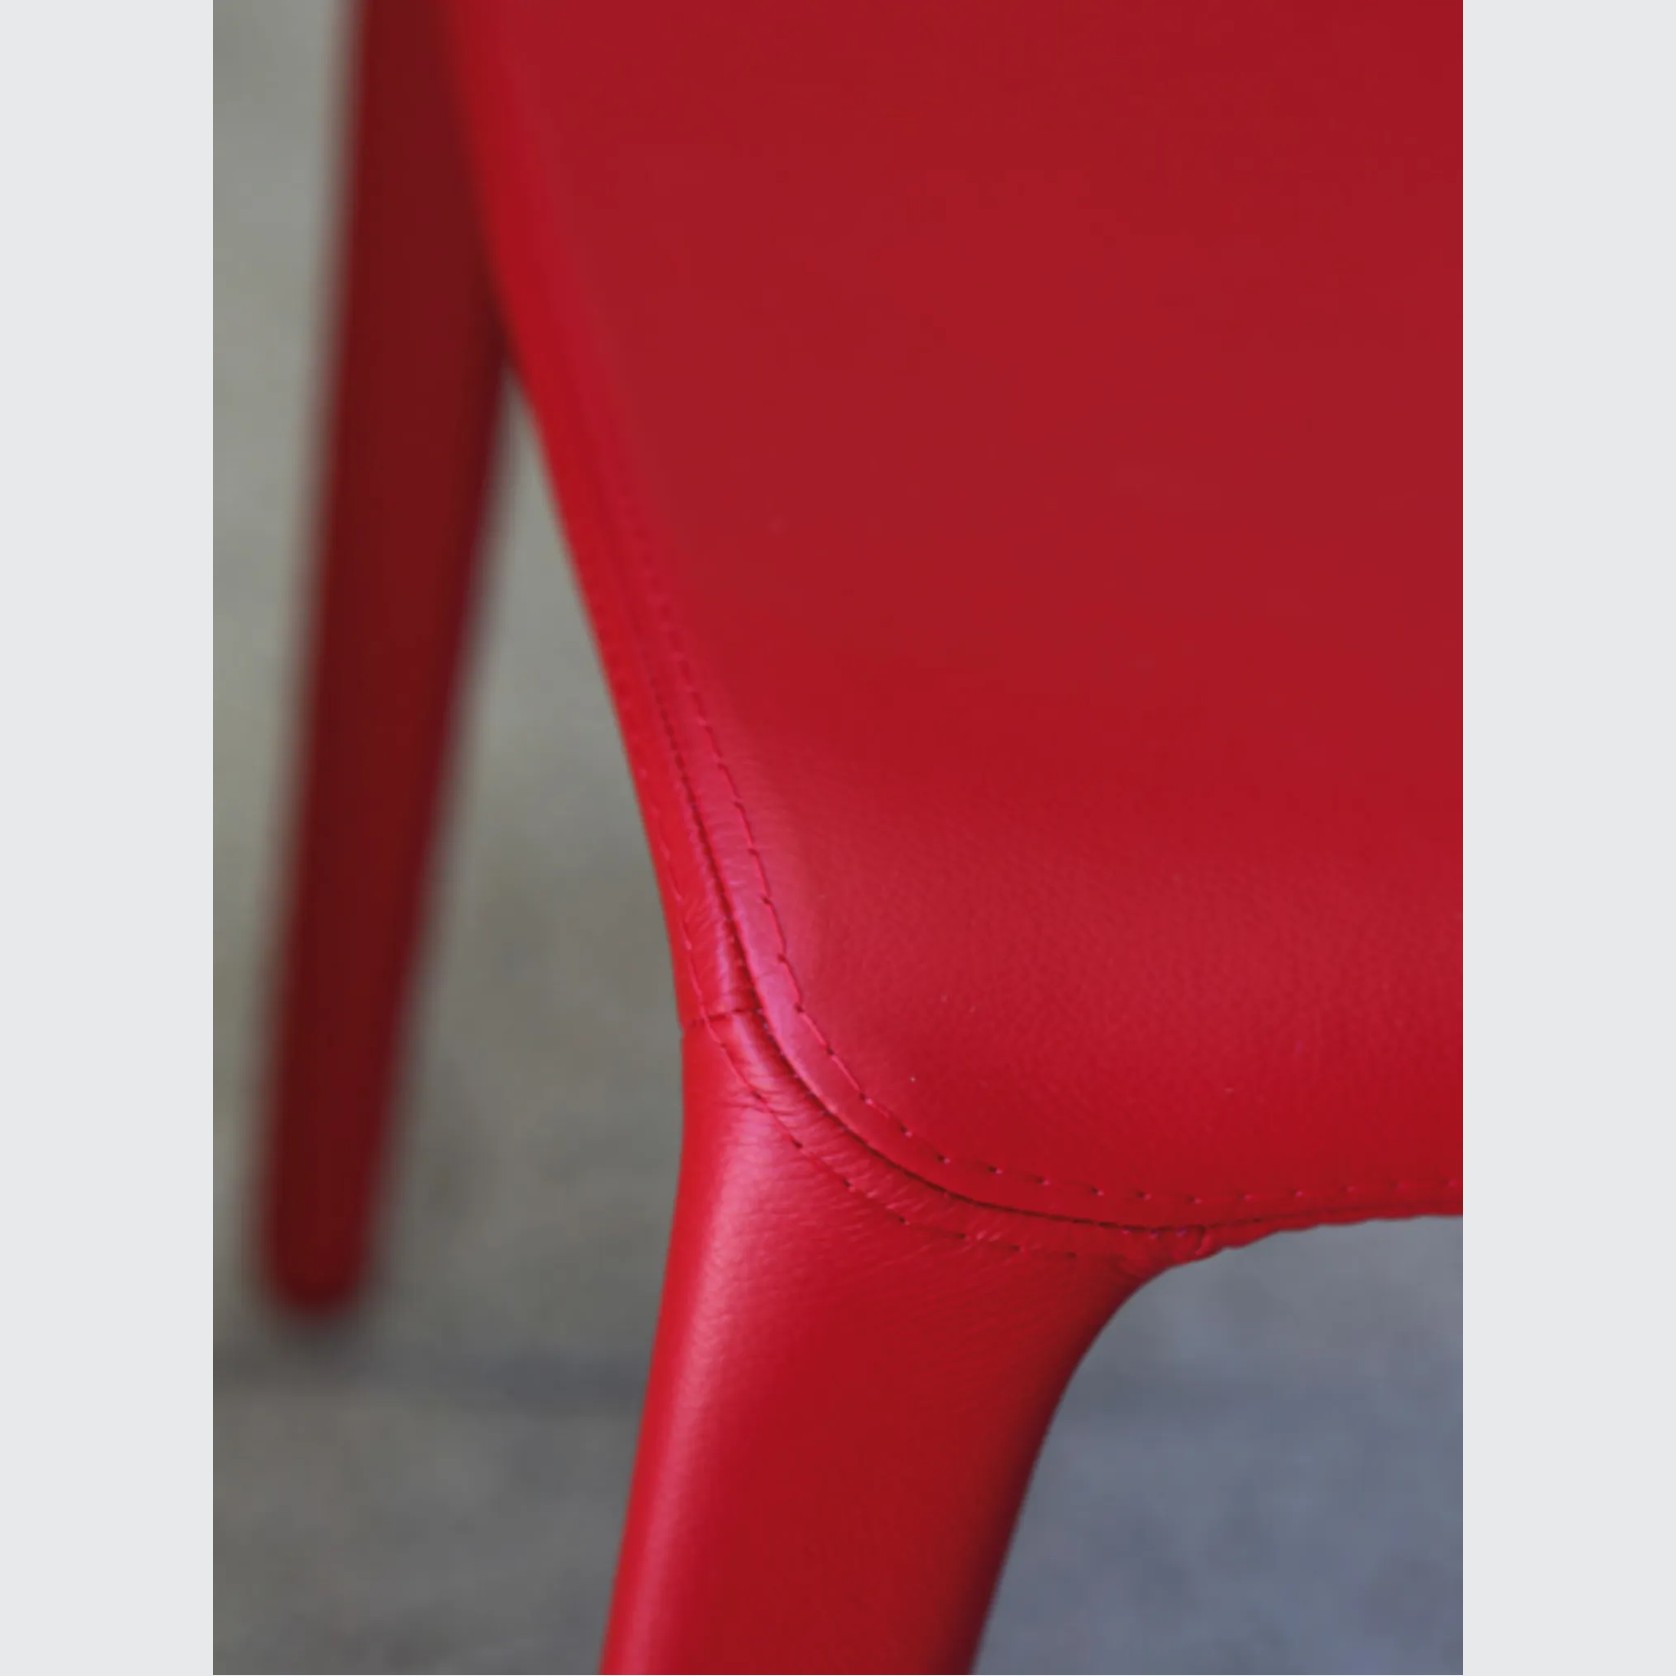 Vittoria Dining Chair gallery detail image